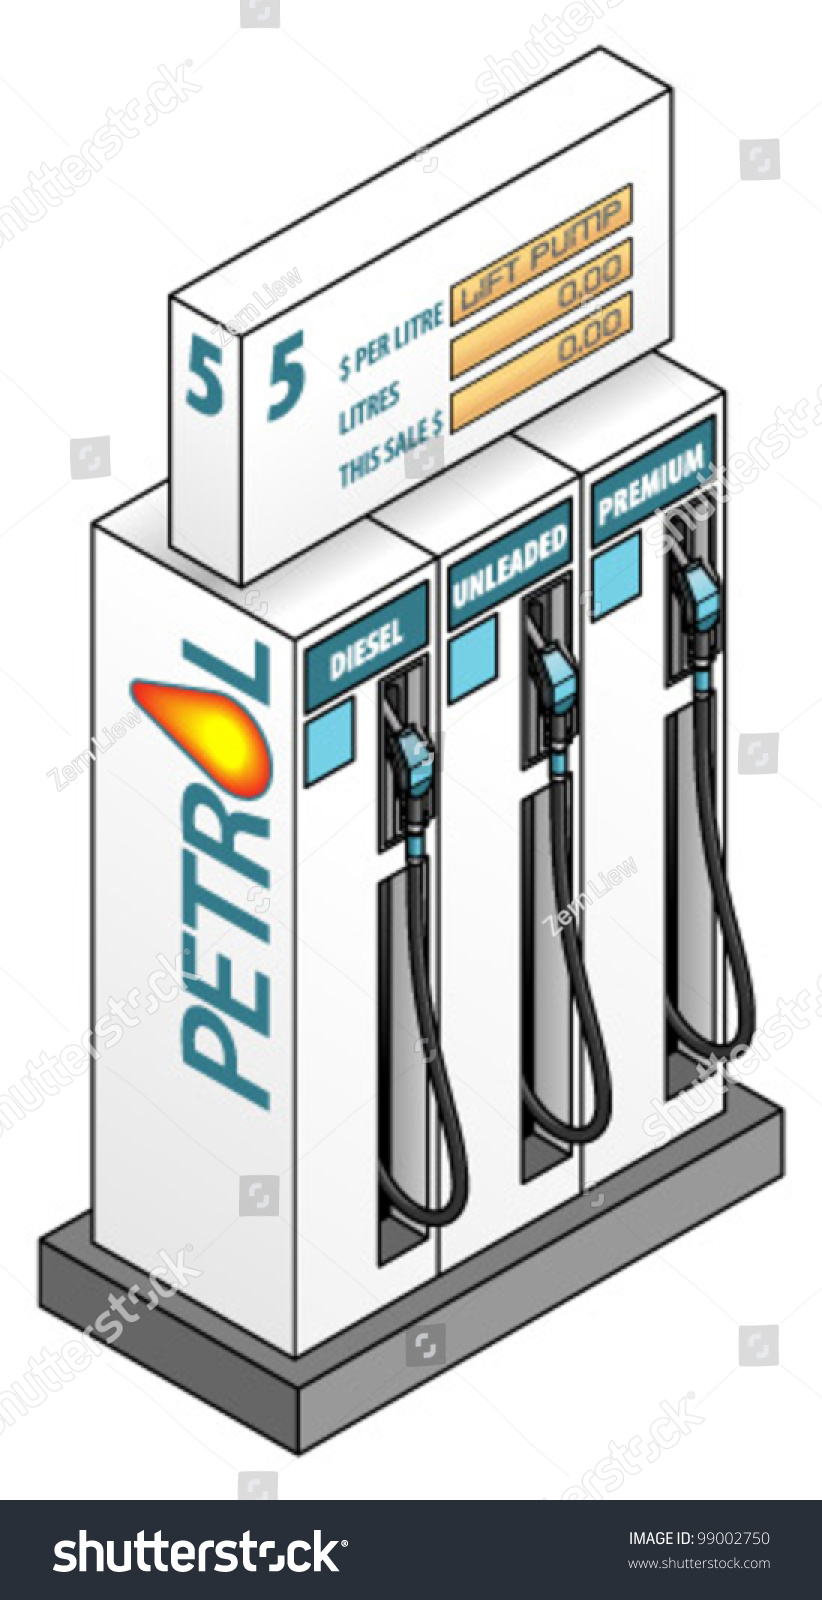 SVG of Three petrol pumps/bowsers with fuel labels: diesel, unleaded and premium. svg